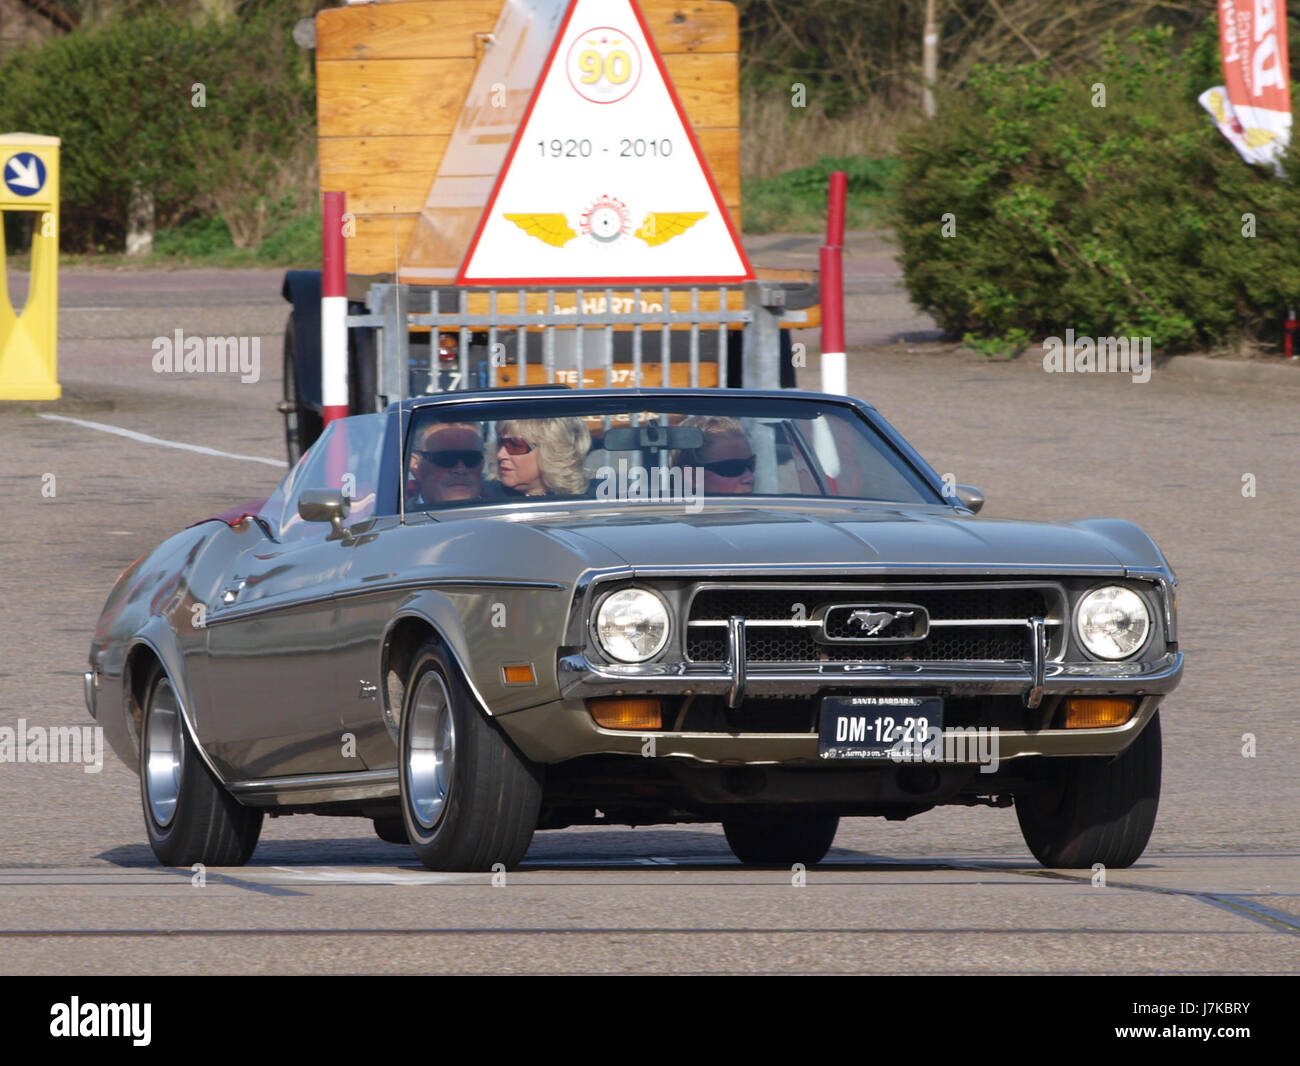 1971 Ford Mustang Convertible pic2 Stock Photo